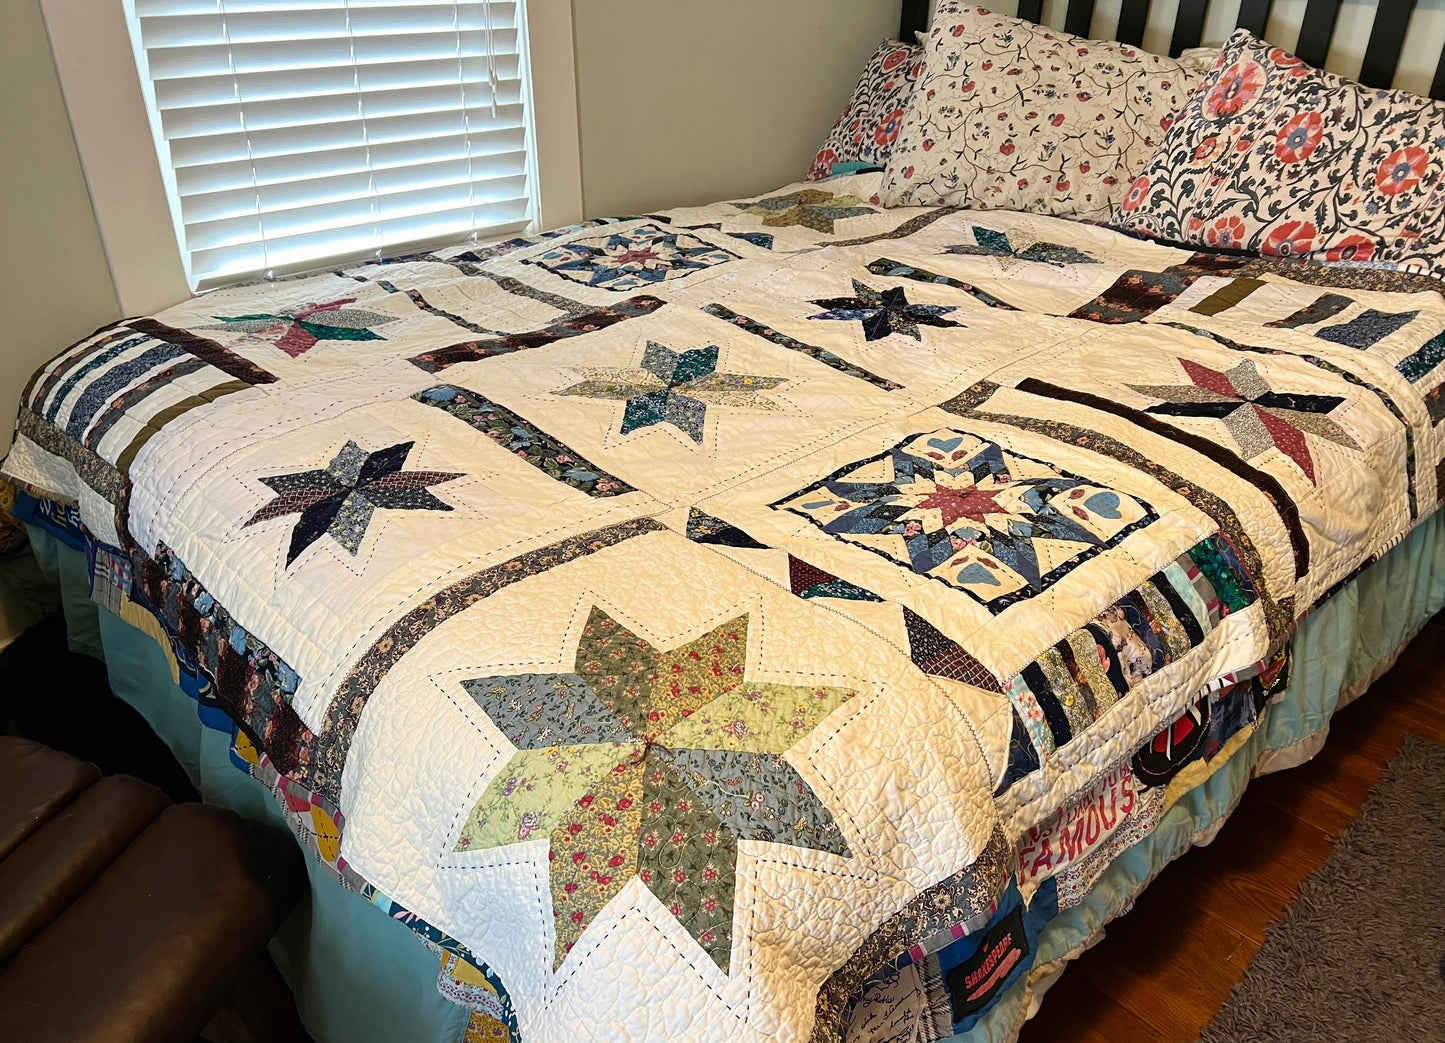 Stars and Stripes Quilt - Eight Point Star - Quilt Art - Twin Sized